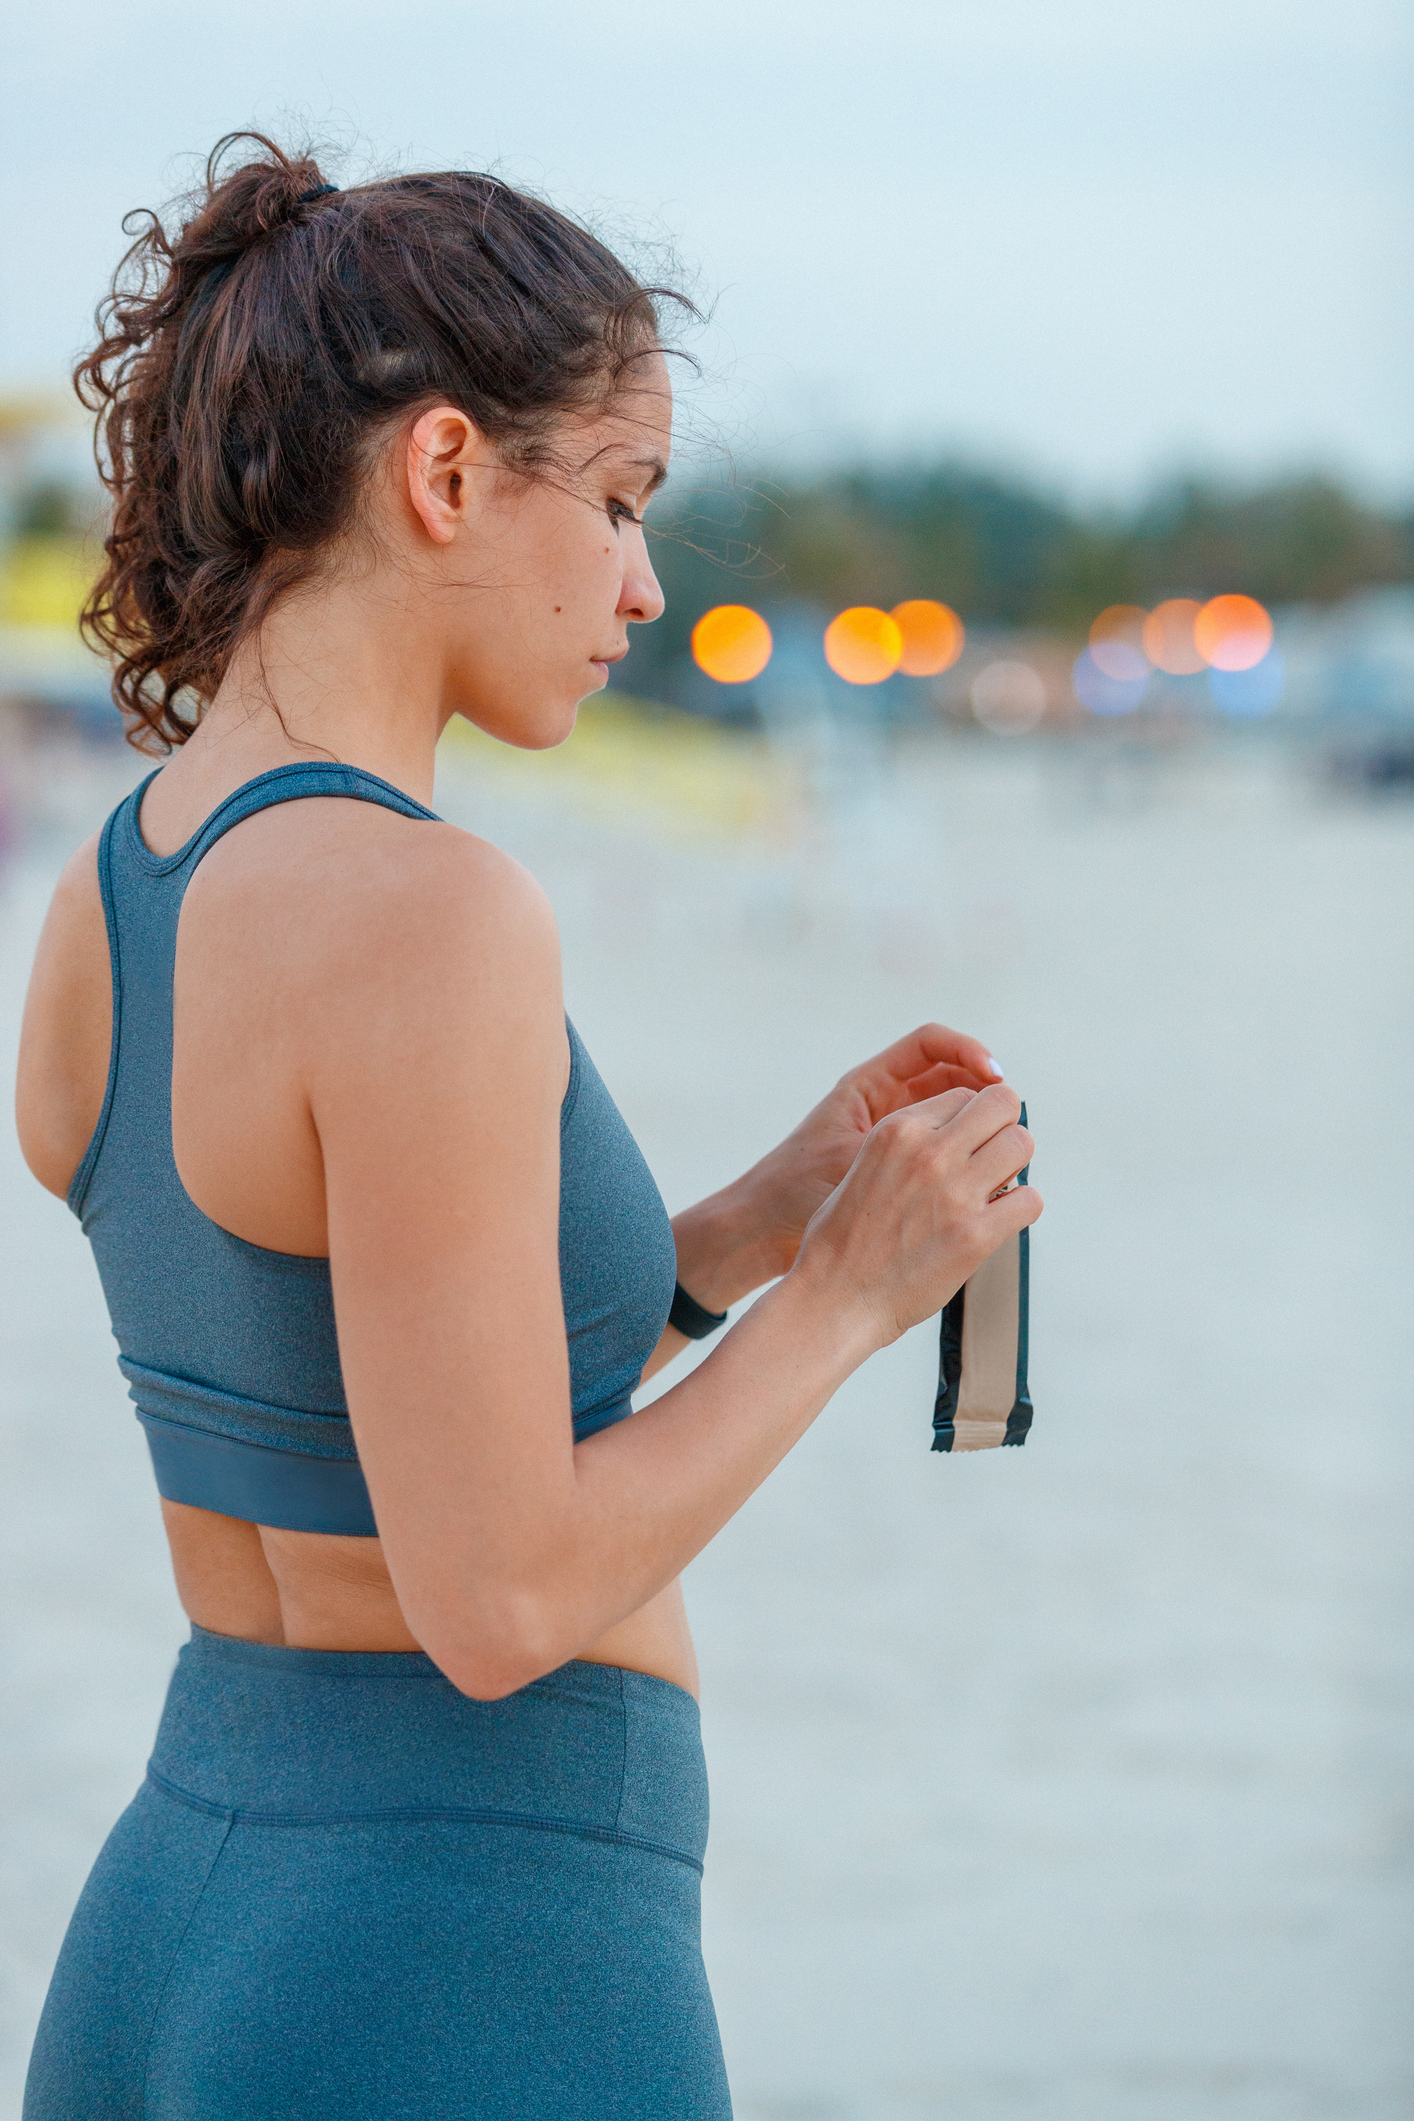 Female jogger opening a protein bar